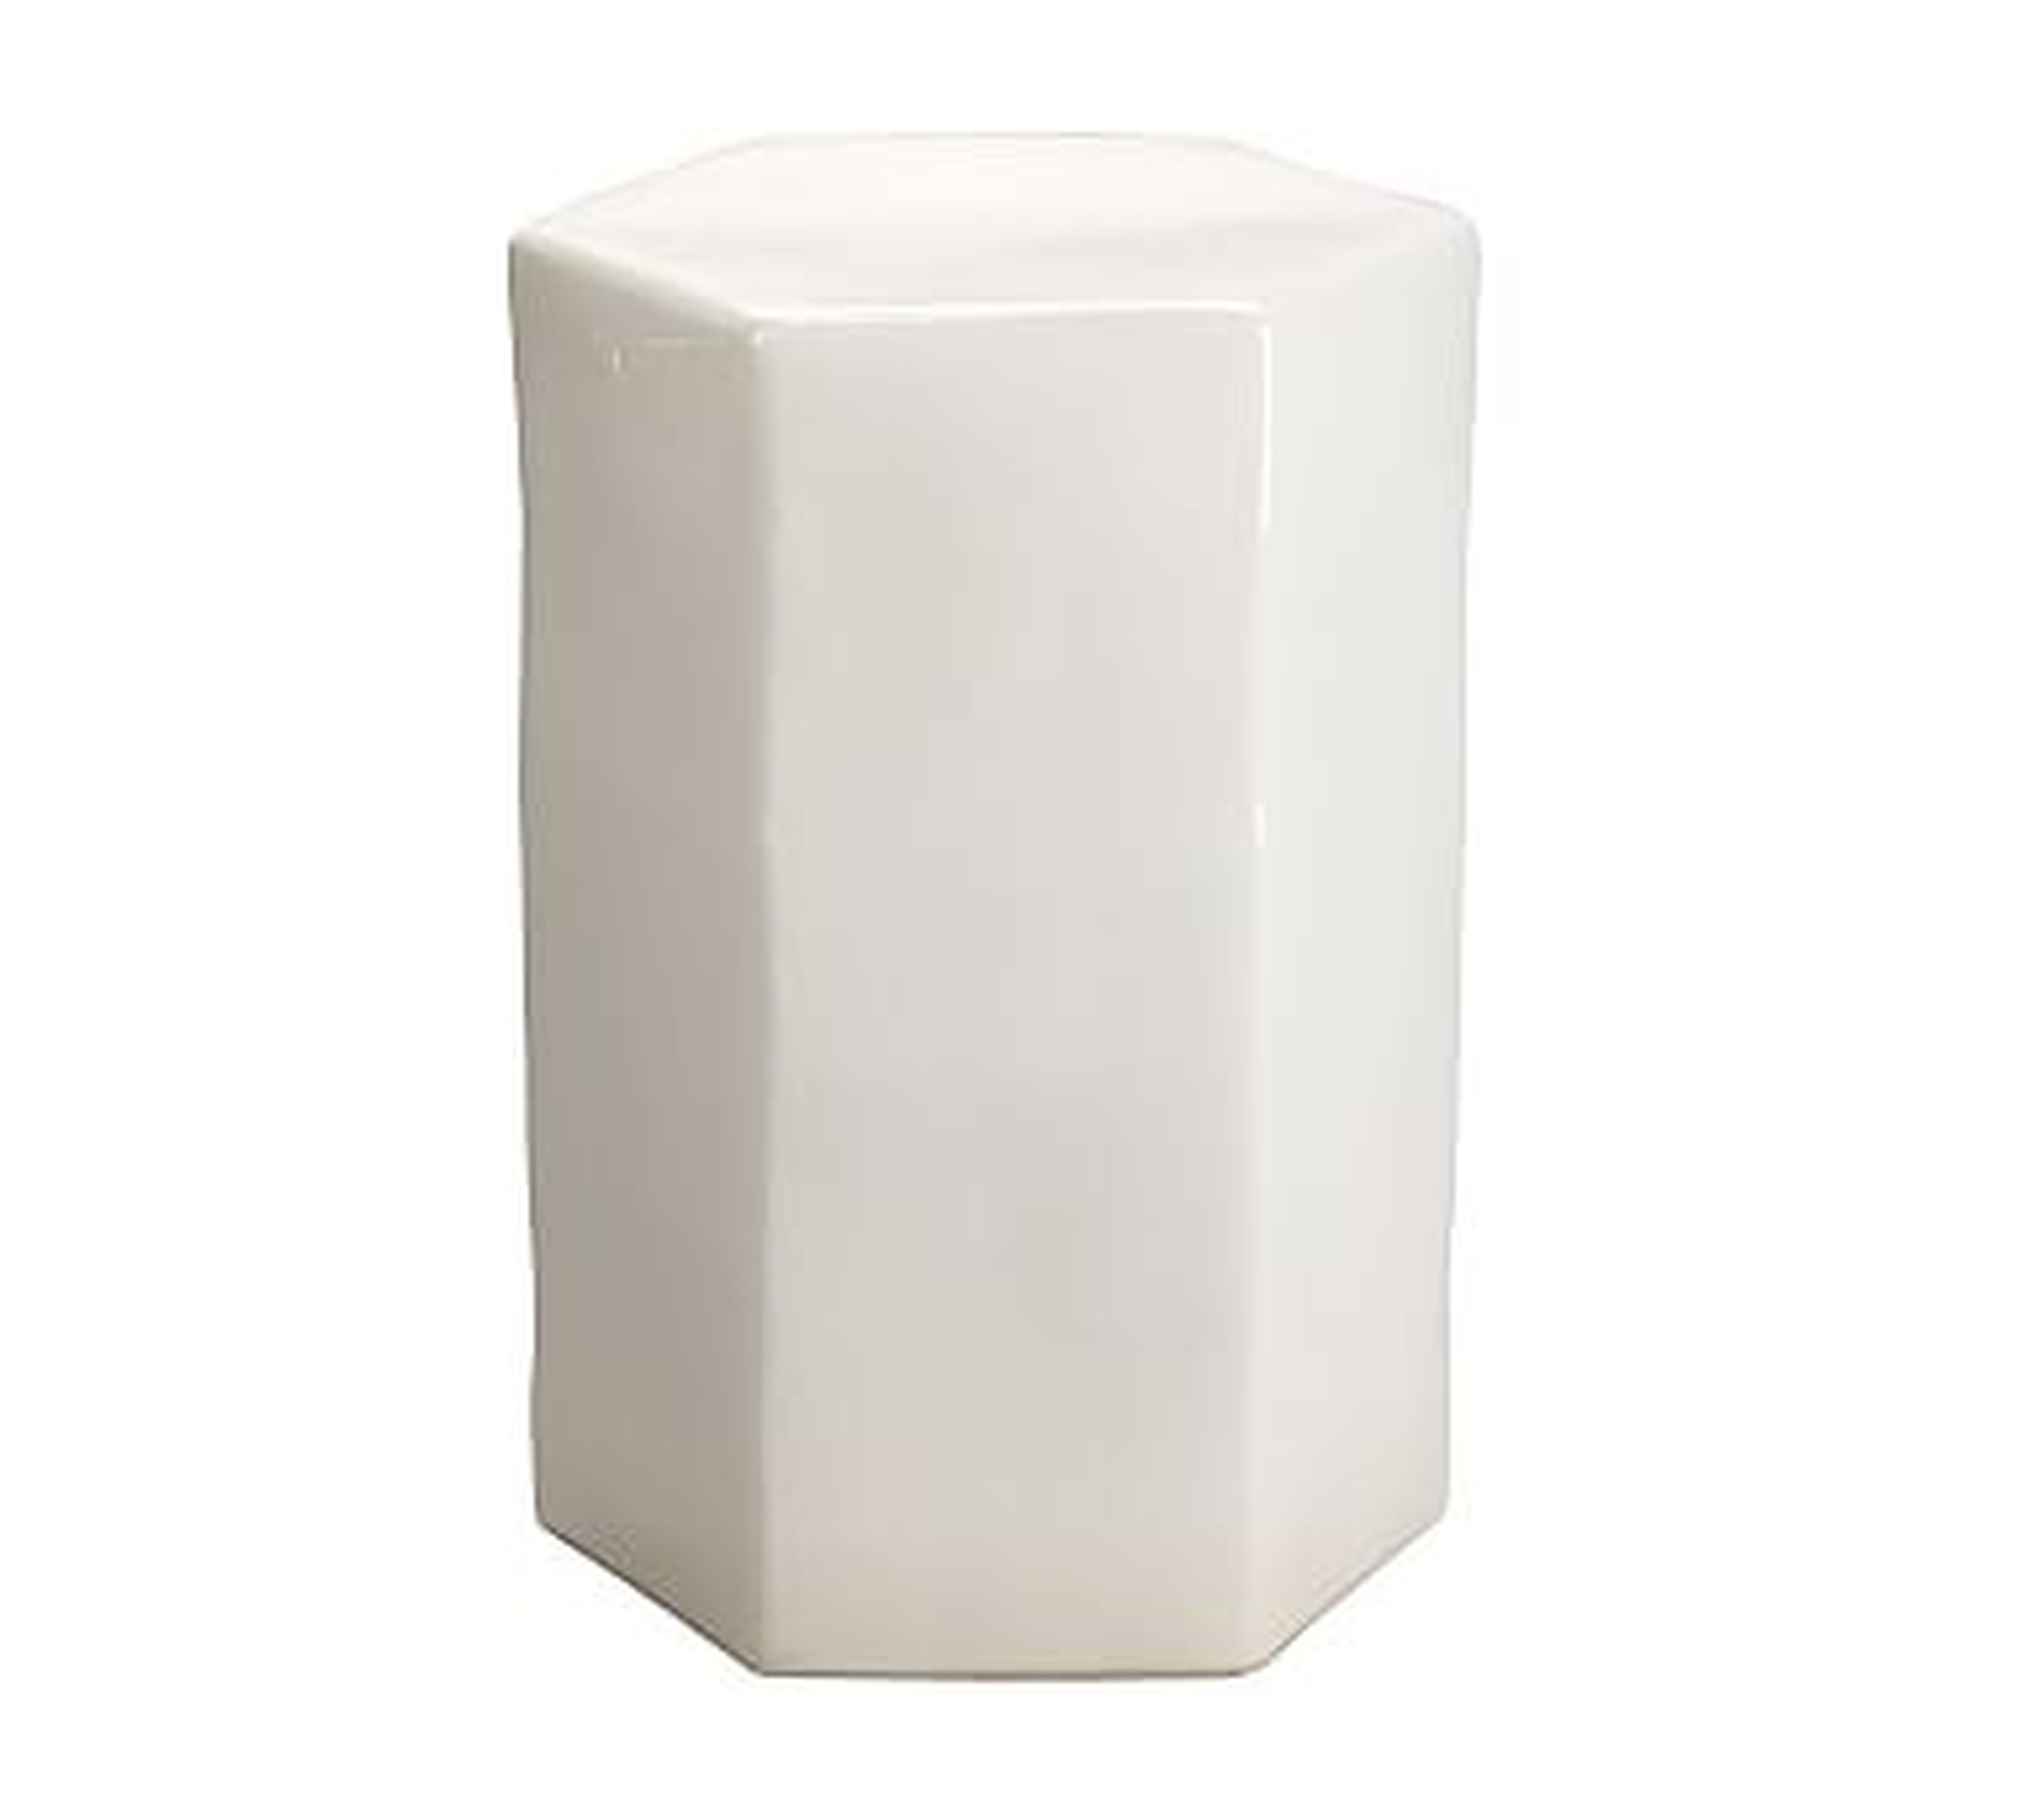 Croft Ceramic Side Table, White, large - Pottery Barn